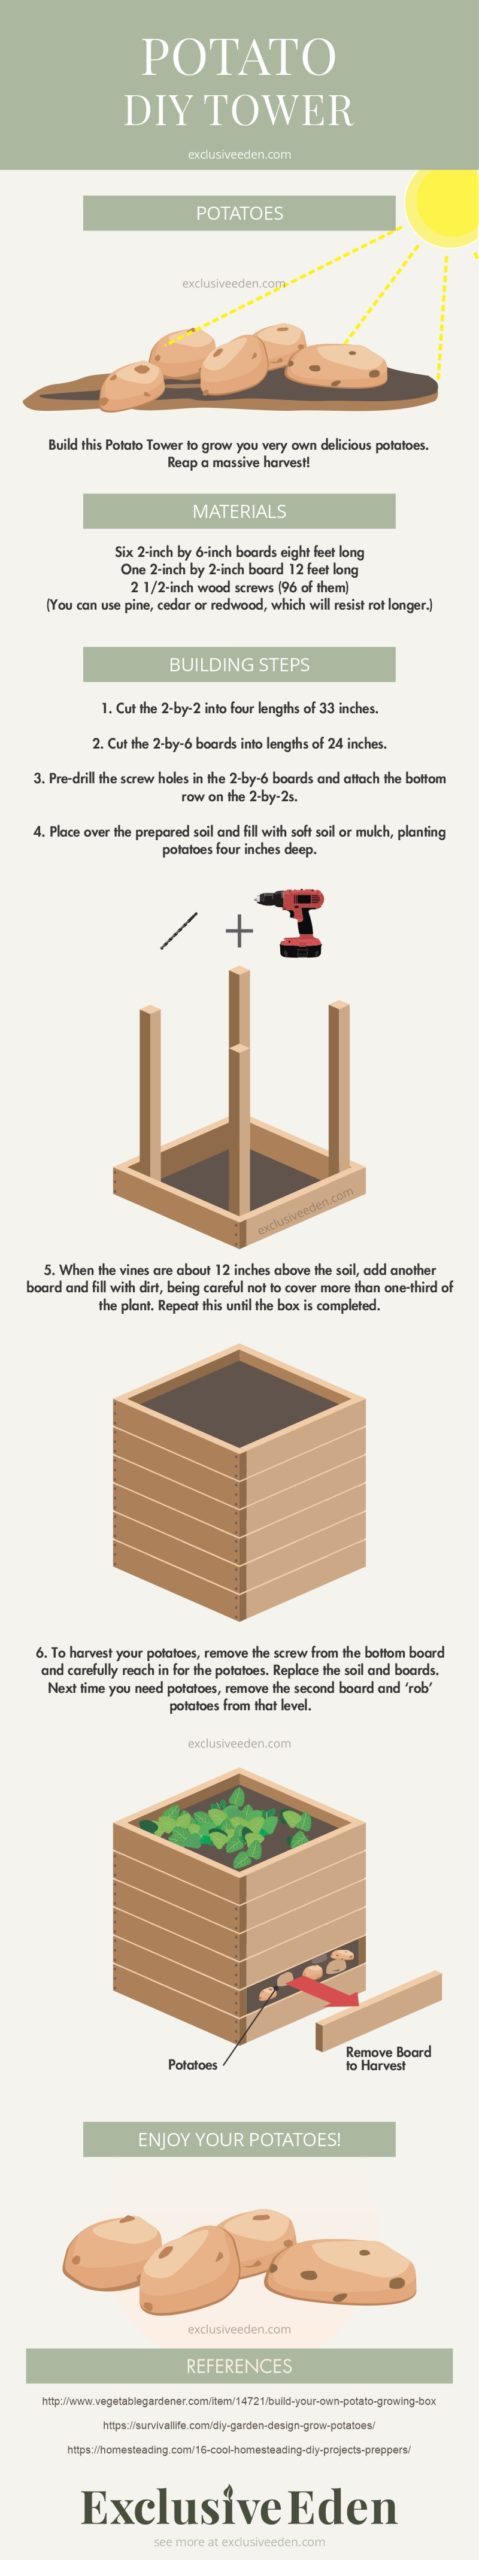 A potato tower illustrated guide helps you to grow more in a practical way.